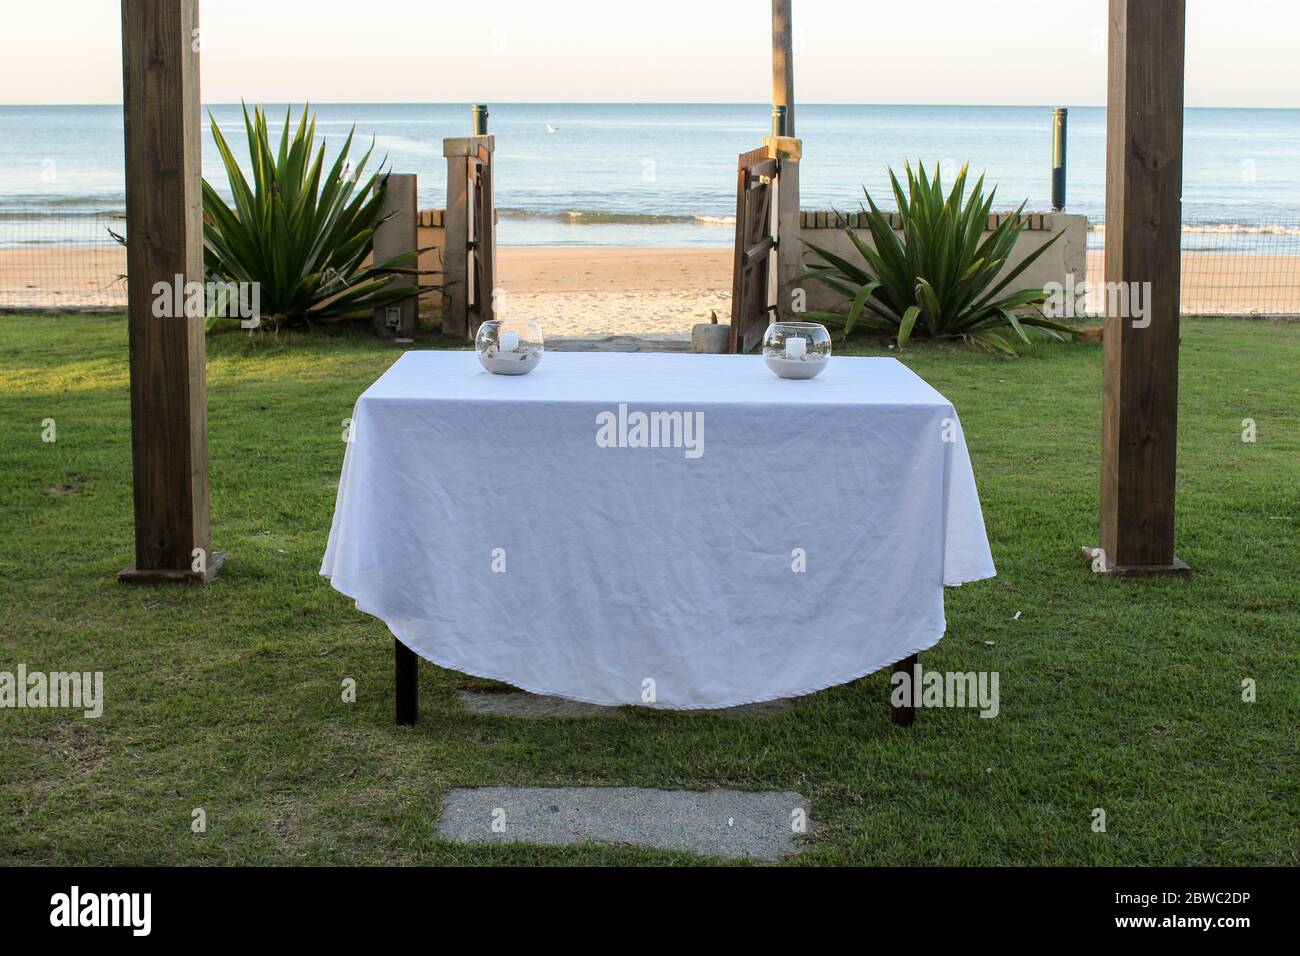 In the center of the image we have a table with two centerpieces that will function as an altar a few meters from the sandy coast and the blue sea. Stock Photo